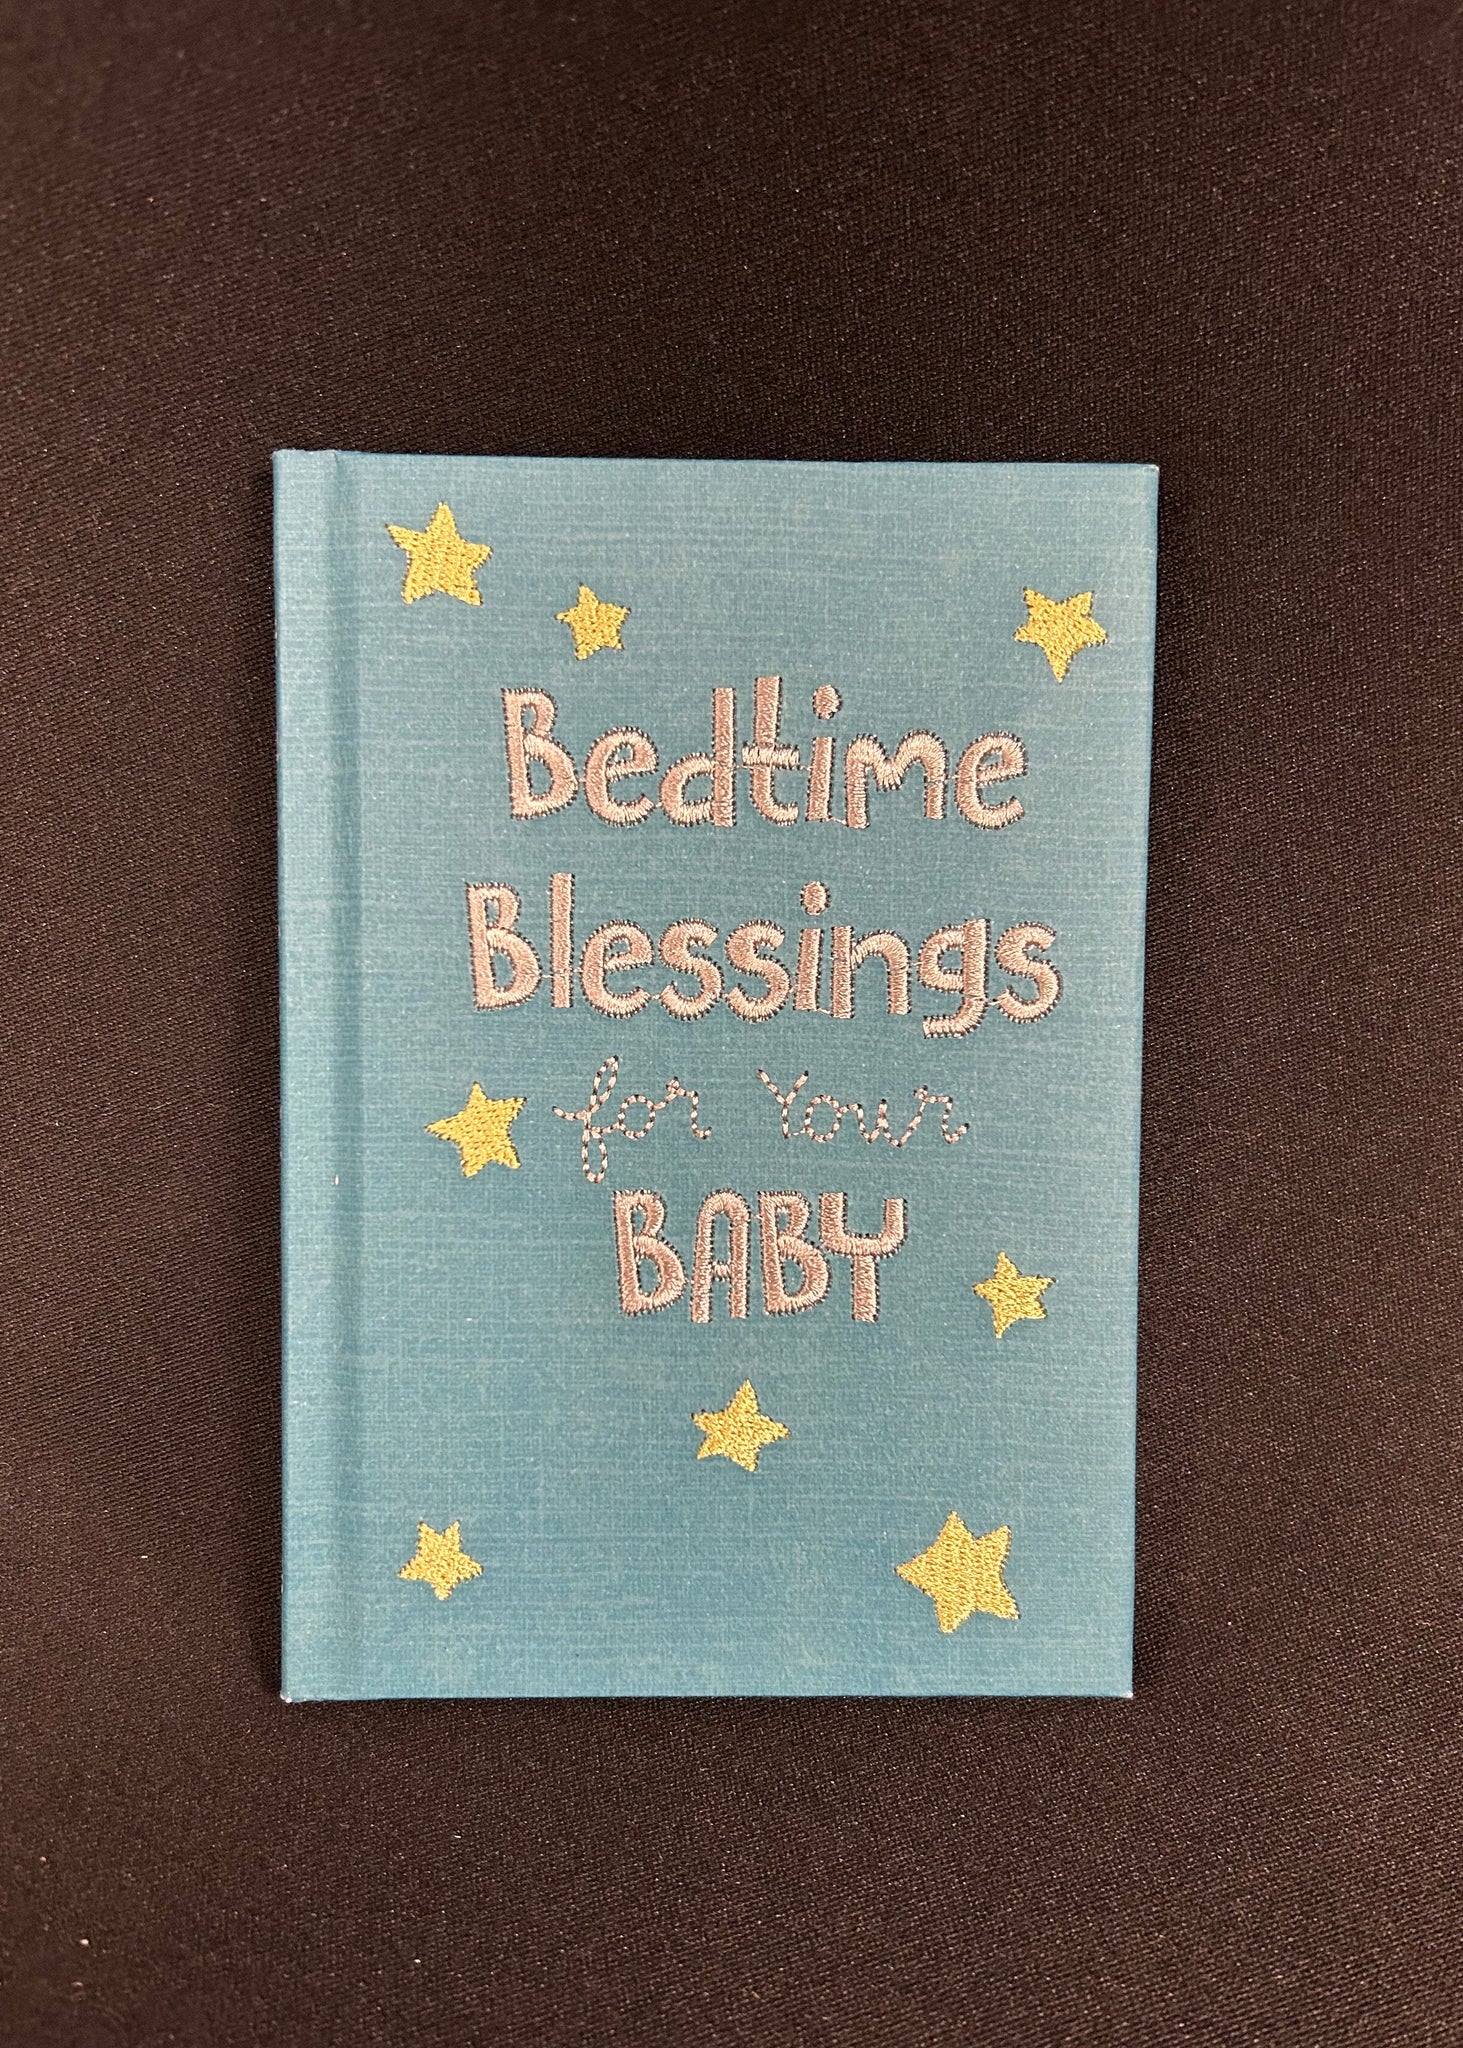 Bedtime Blessings for Your Baby